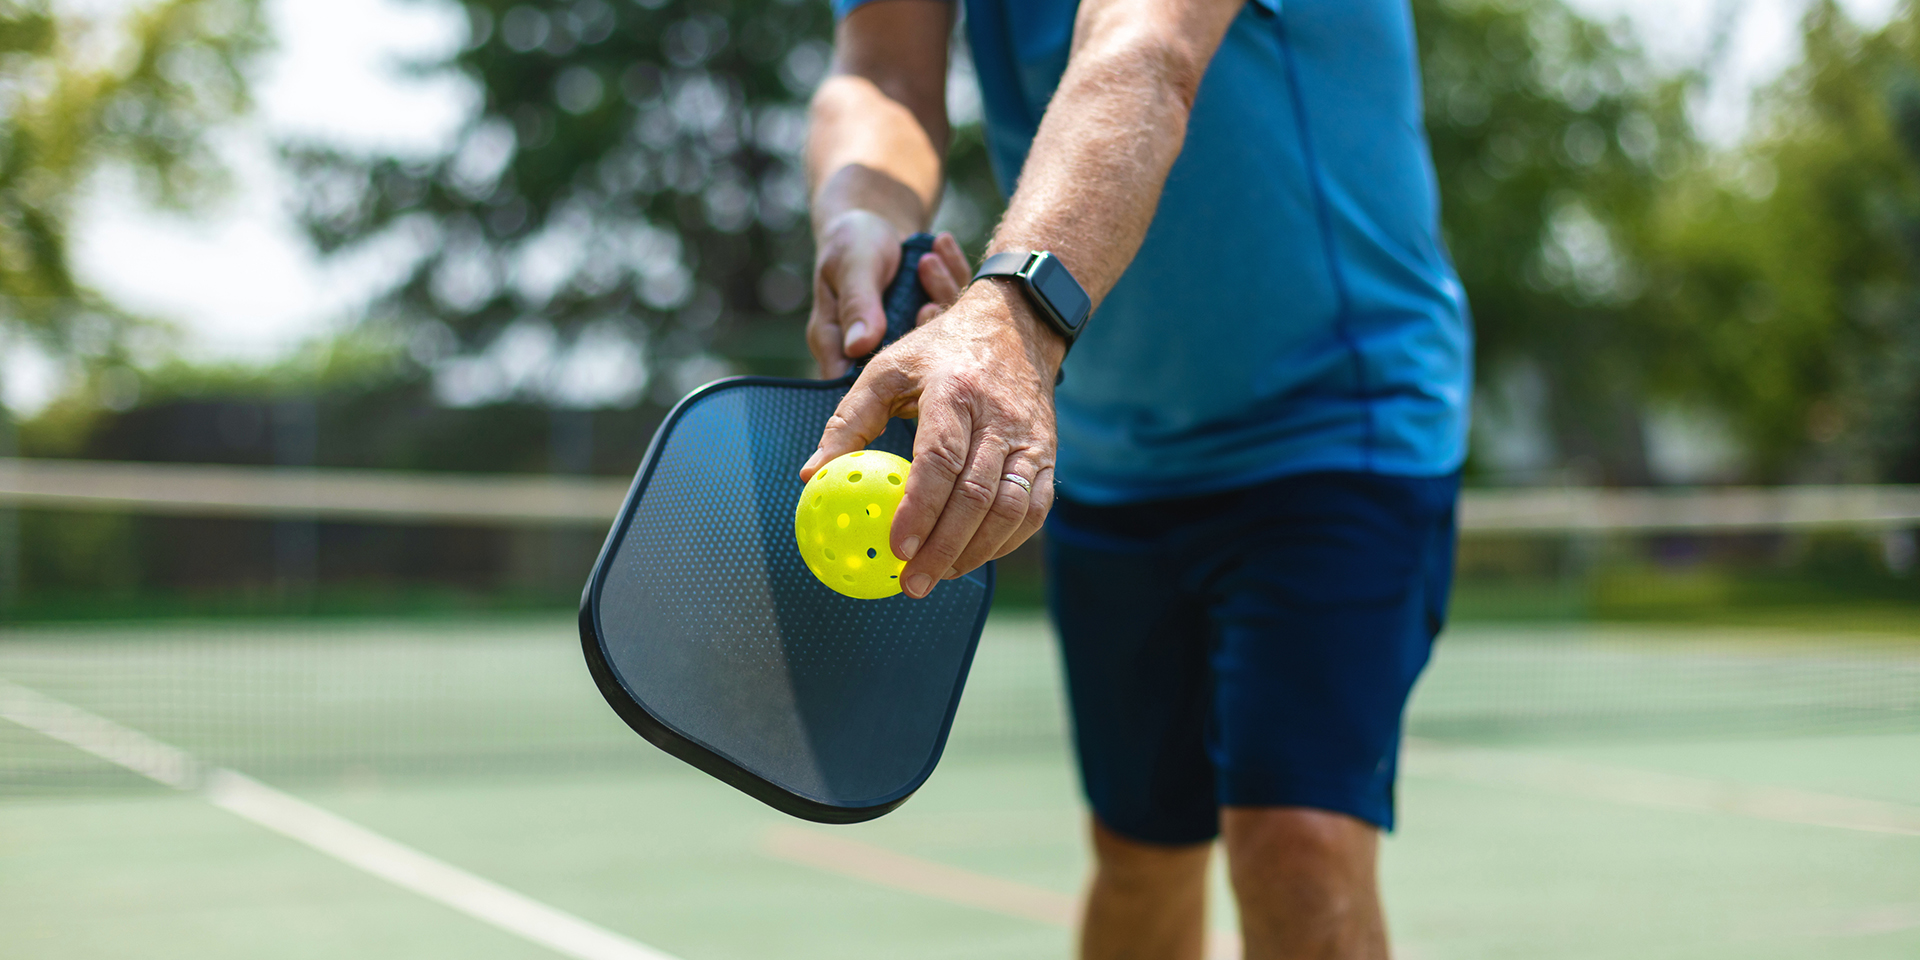 Mature adult male in a blue shirt and shorts preparing to serve a yellow pickleball with a blue paddle